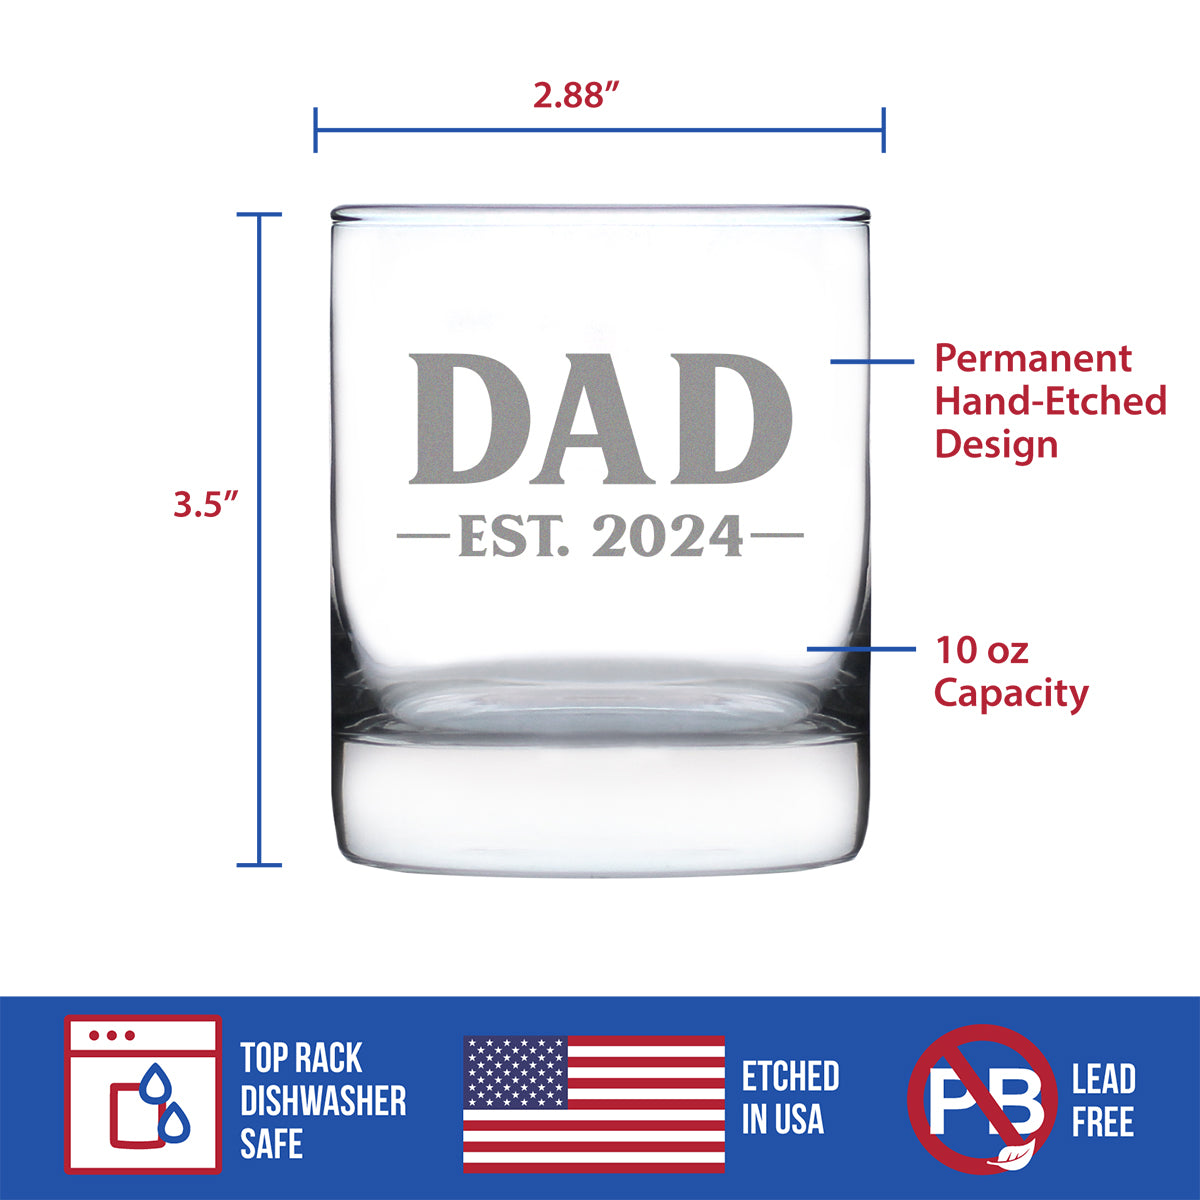 Dad Est 2024 - New Father Whiskey Rocks Glass Gift for First Time Parents - Bold 10.25 Oz Glasses